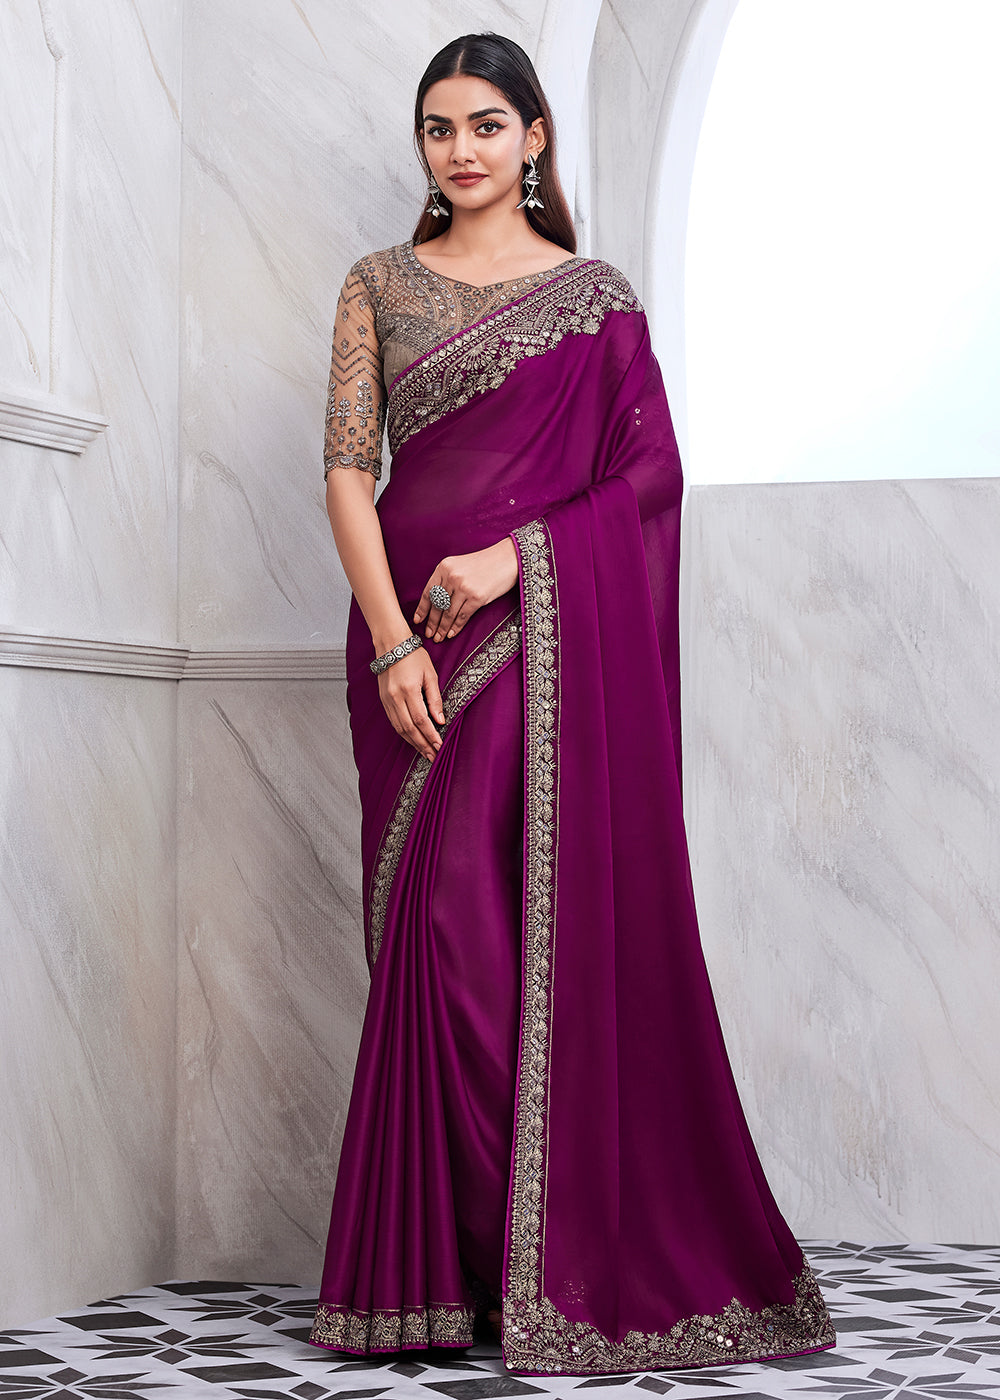 Buy Now Lovely Purple Wine Silk Embroidered Designer Saree Online in USA, UK, Canada & Worldwide at Empress Clothing.